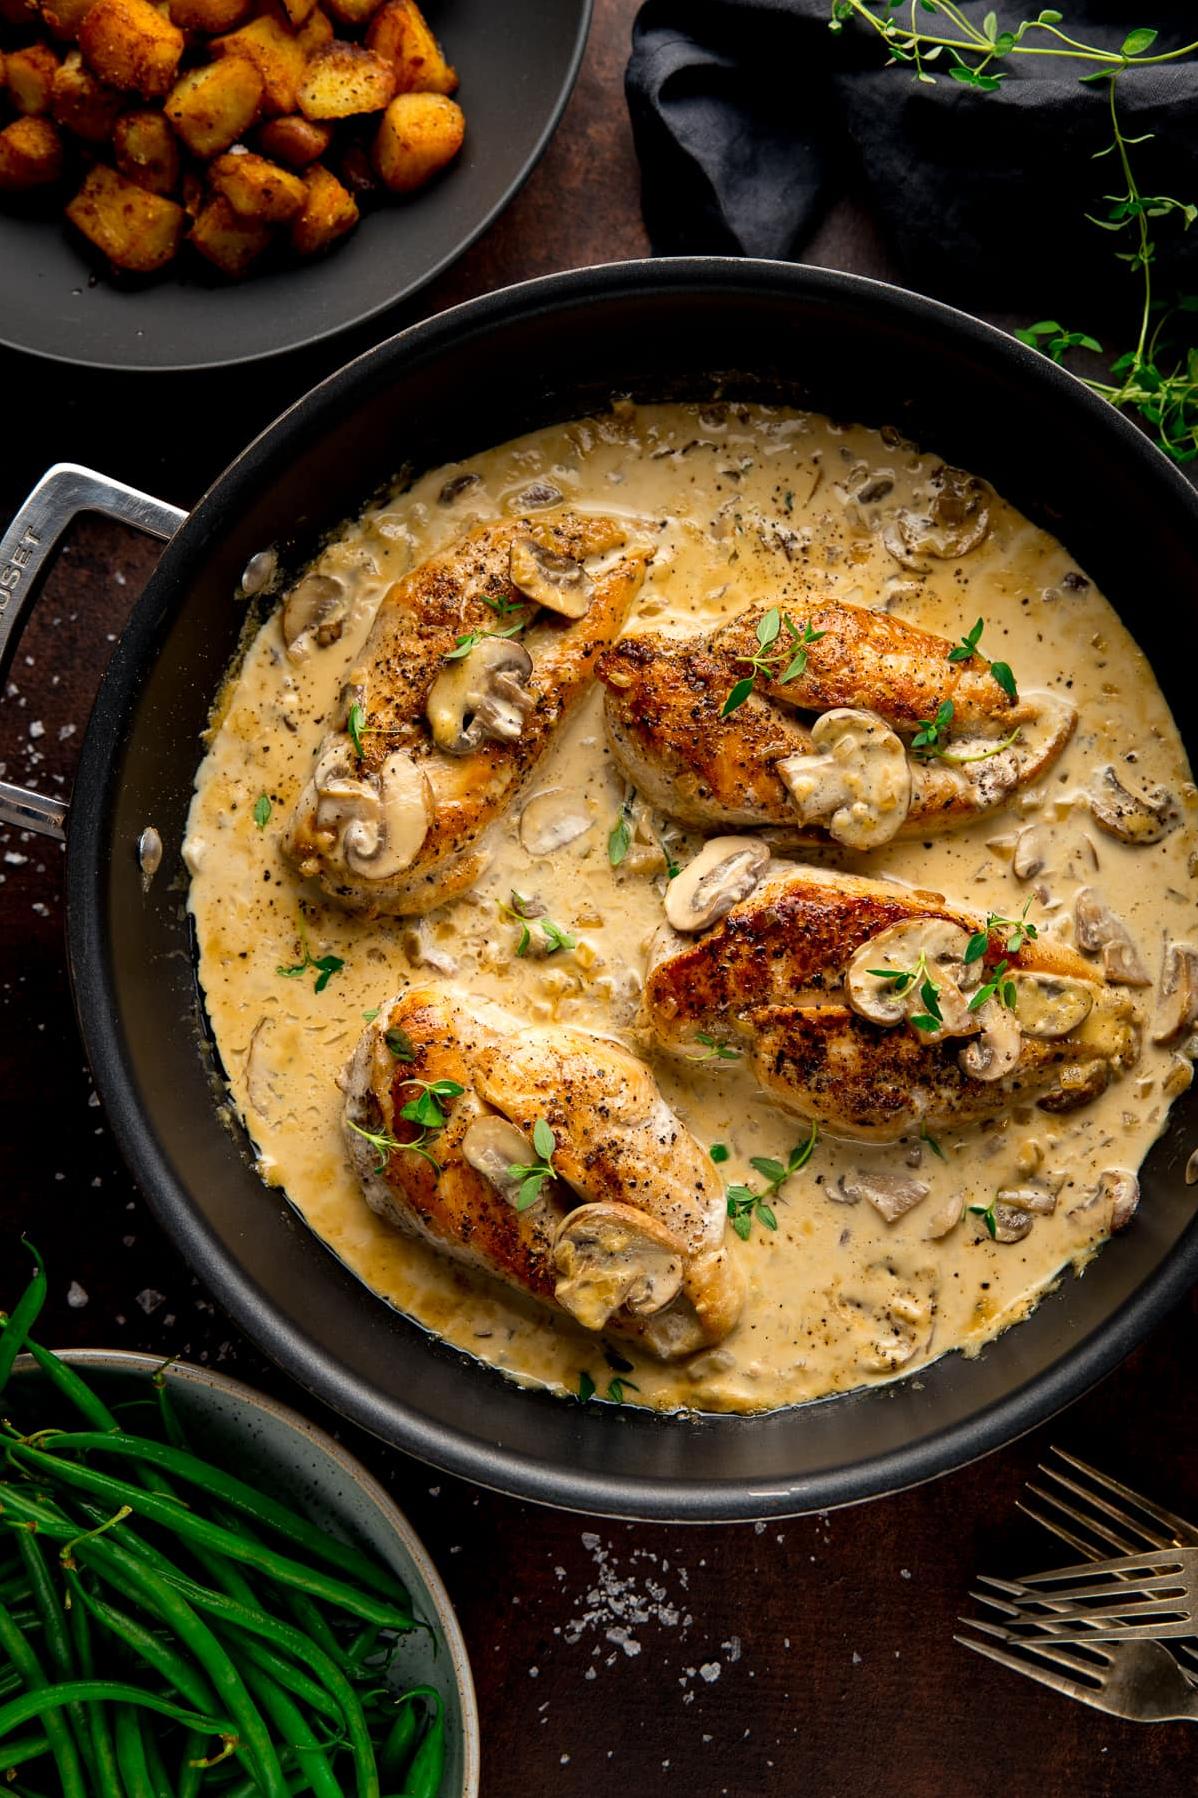  Juicy chicken and velvety mushrooms in a luscious white wine sauce